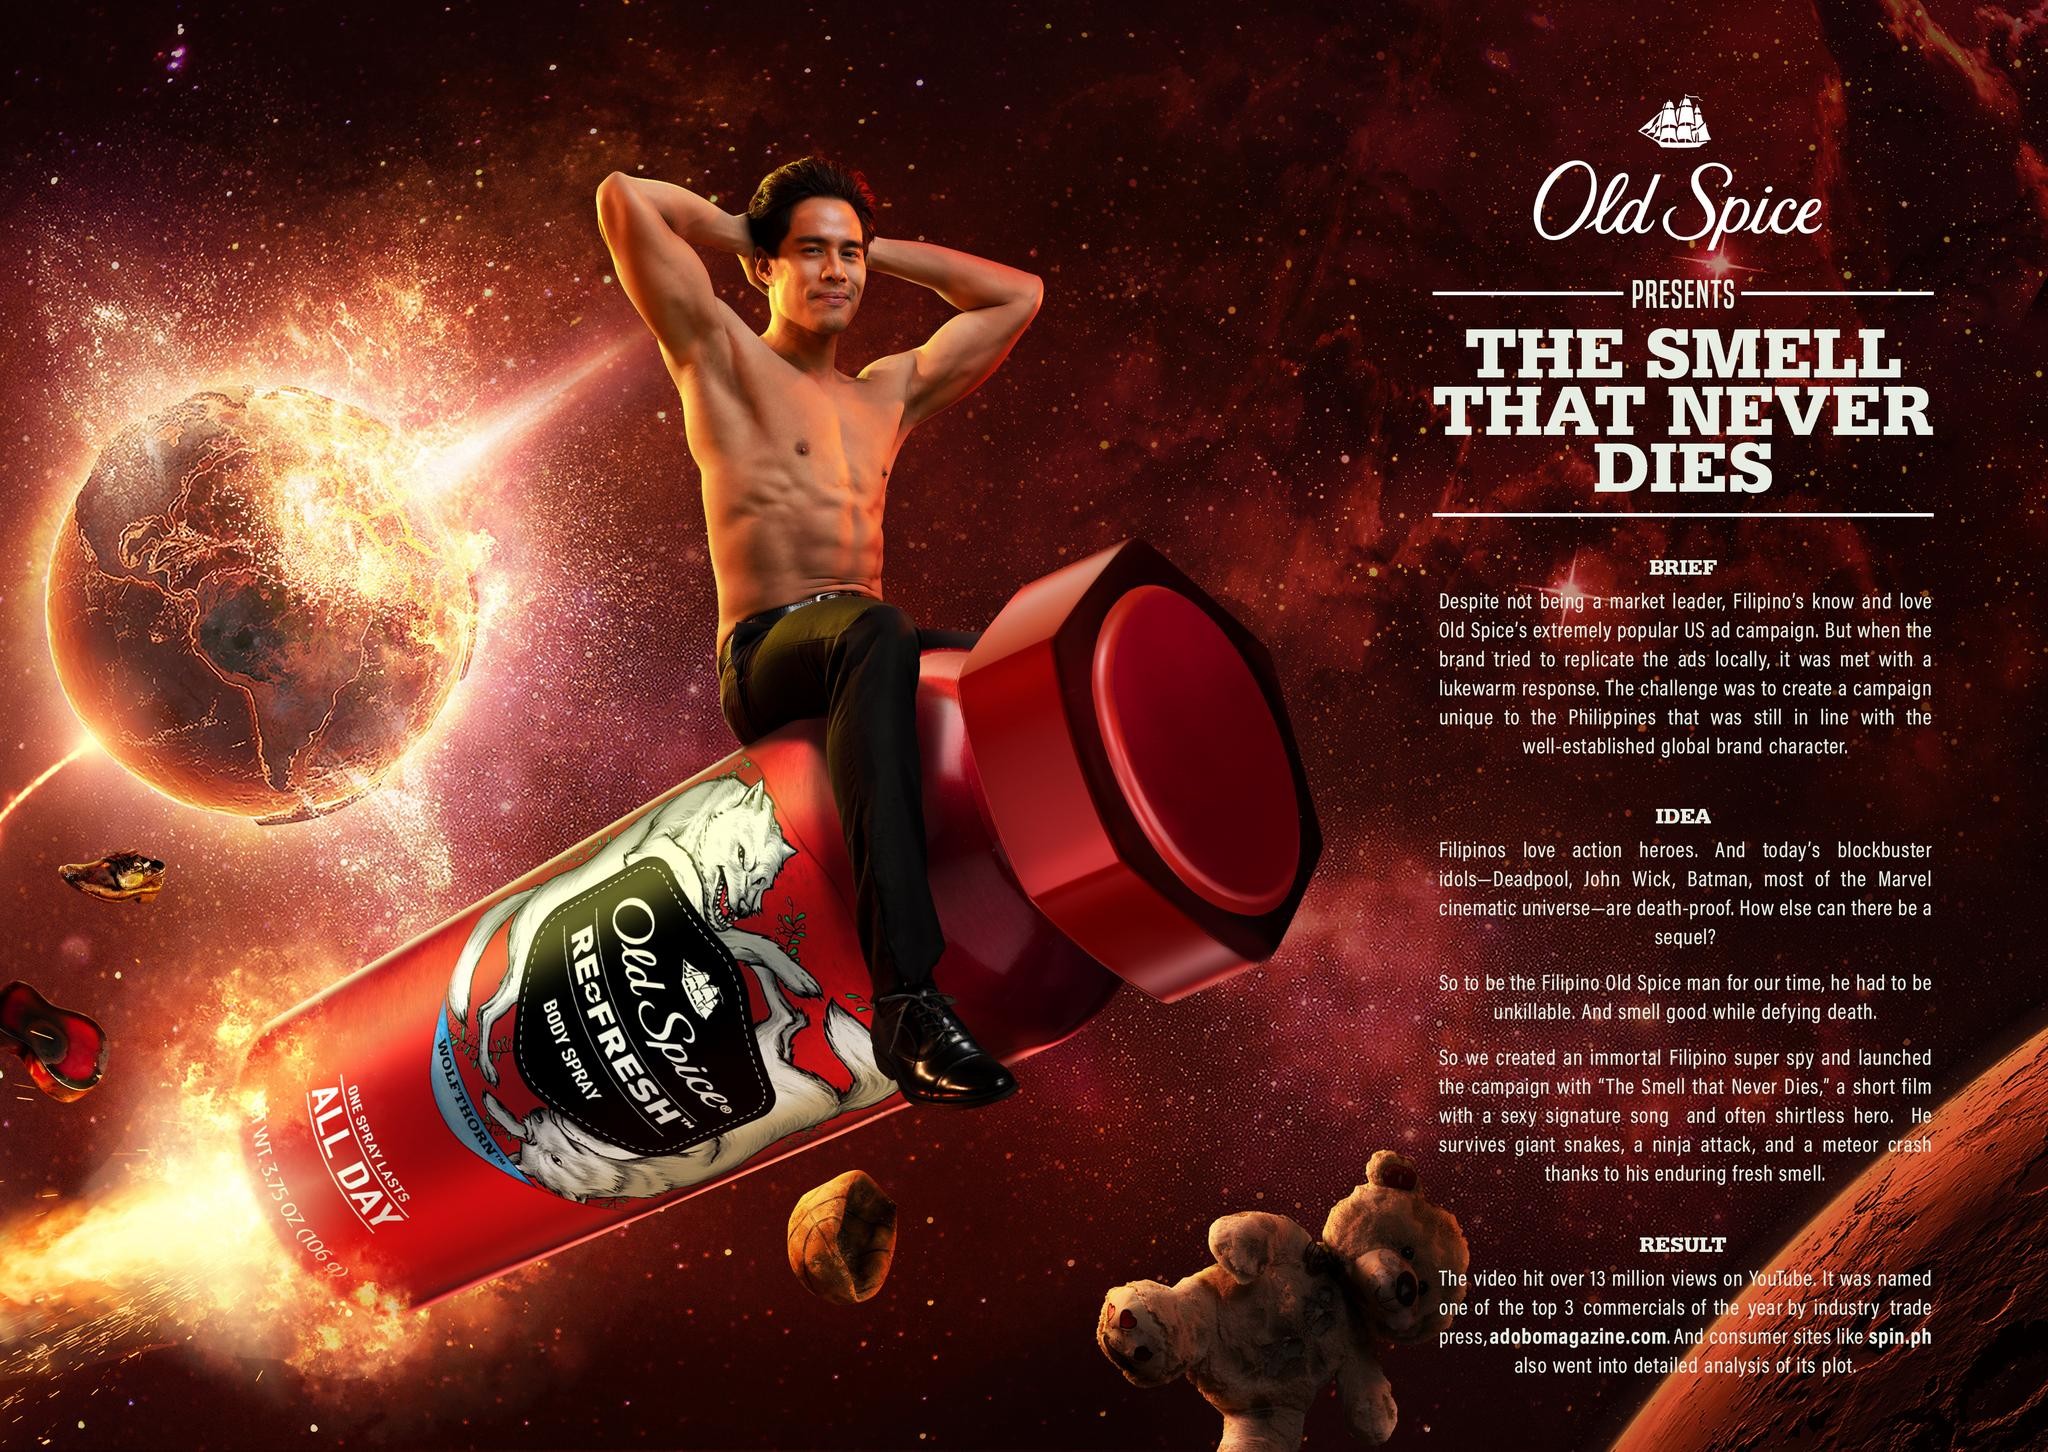 Old Spice - The Smell that Never Dies